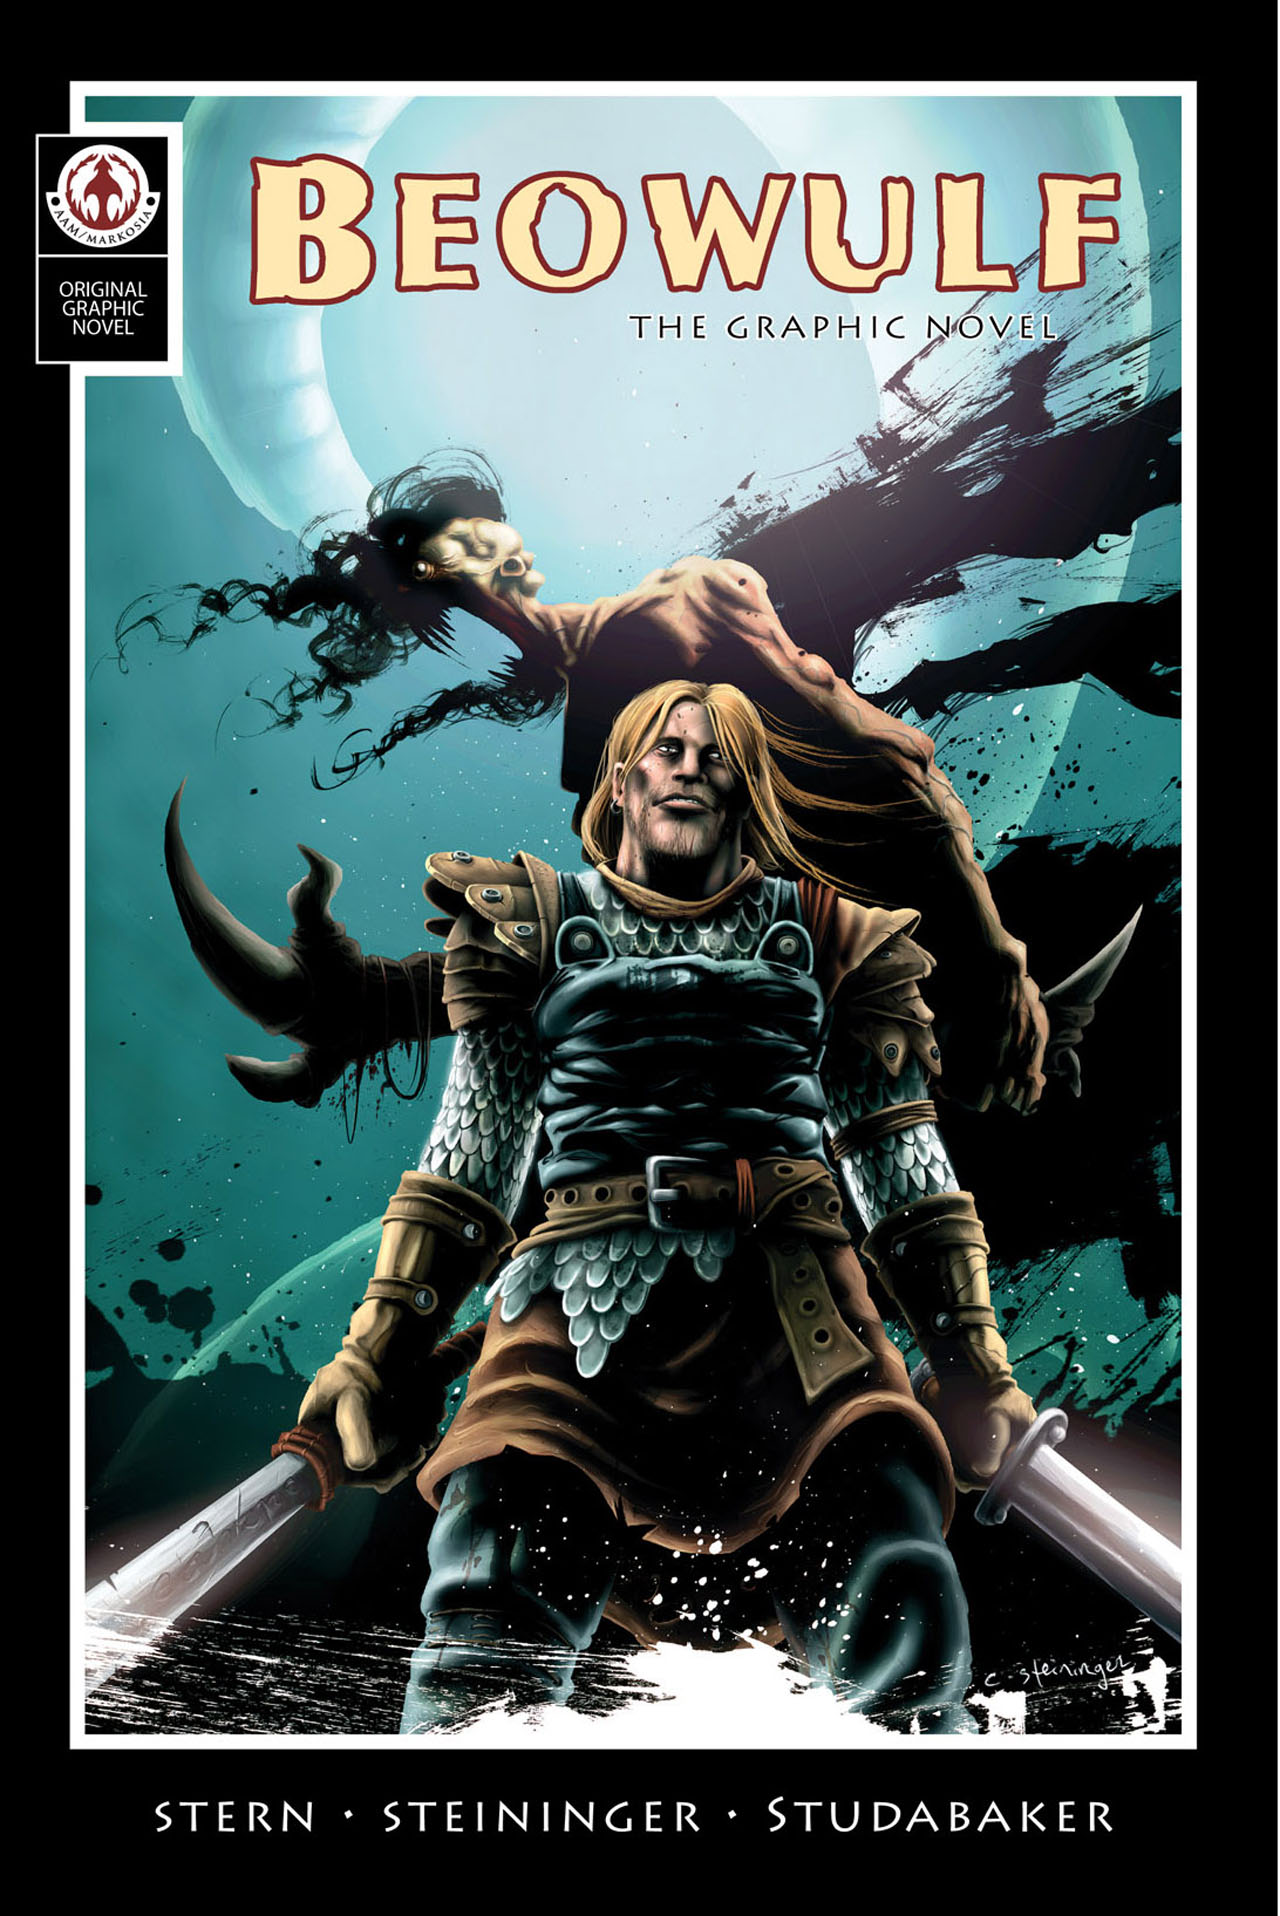 Read online Beowulf: The Graphic Novel comic -  Issue # Full - 1